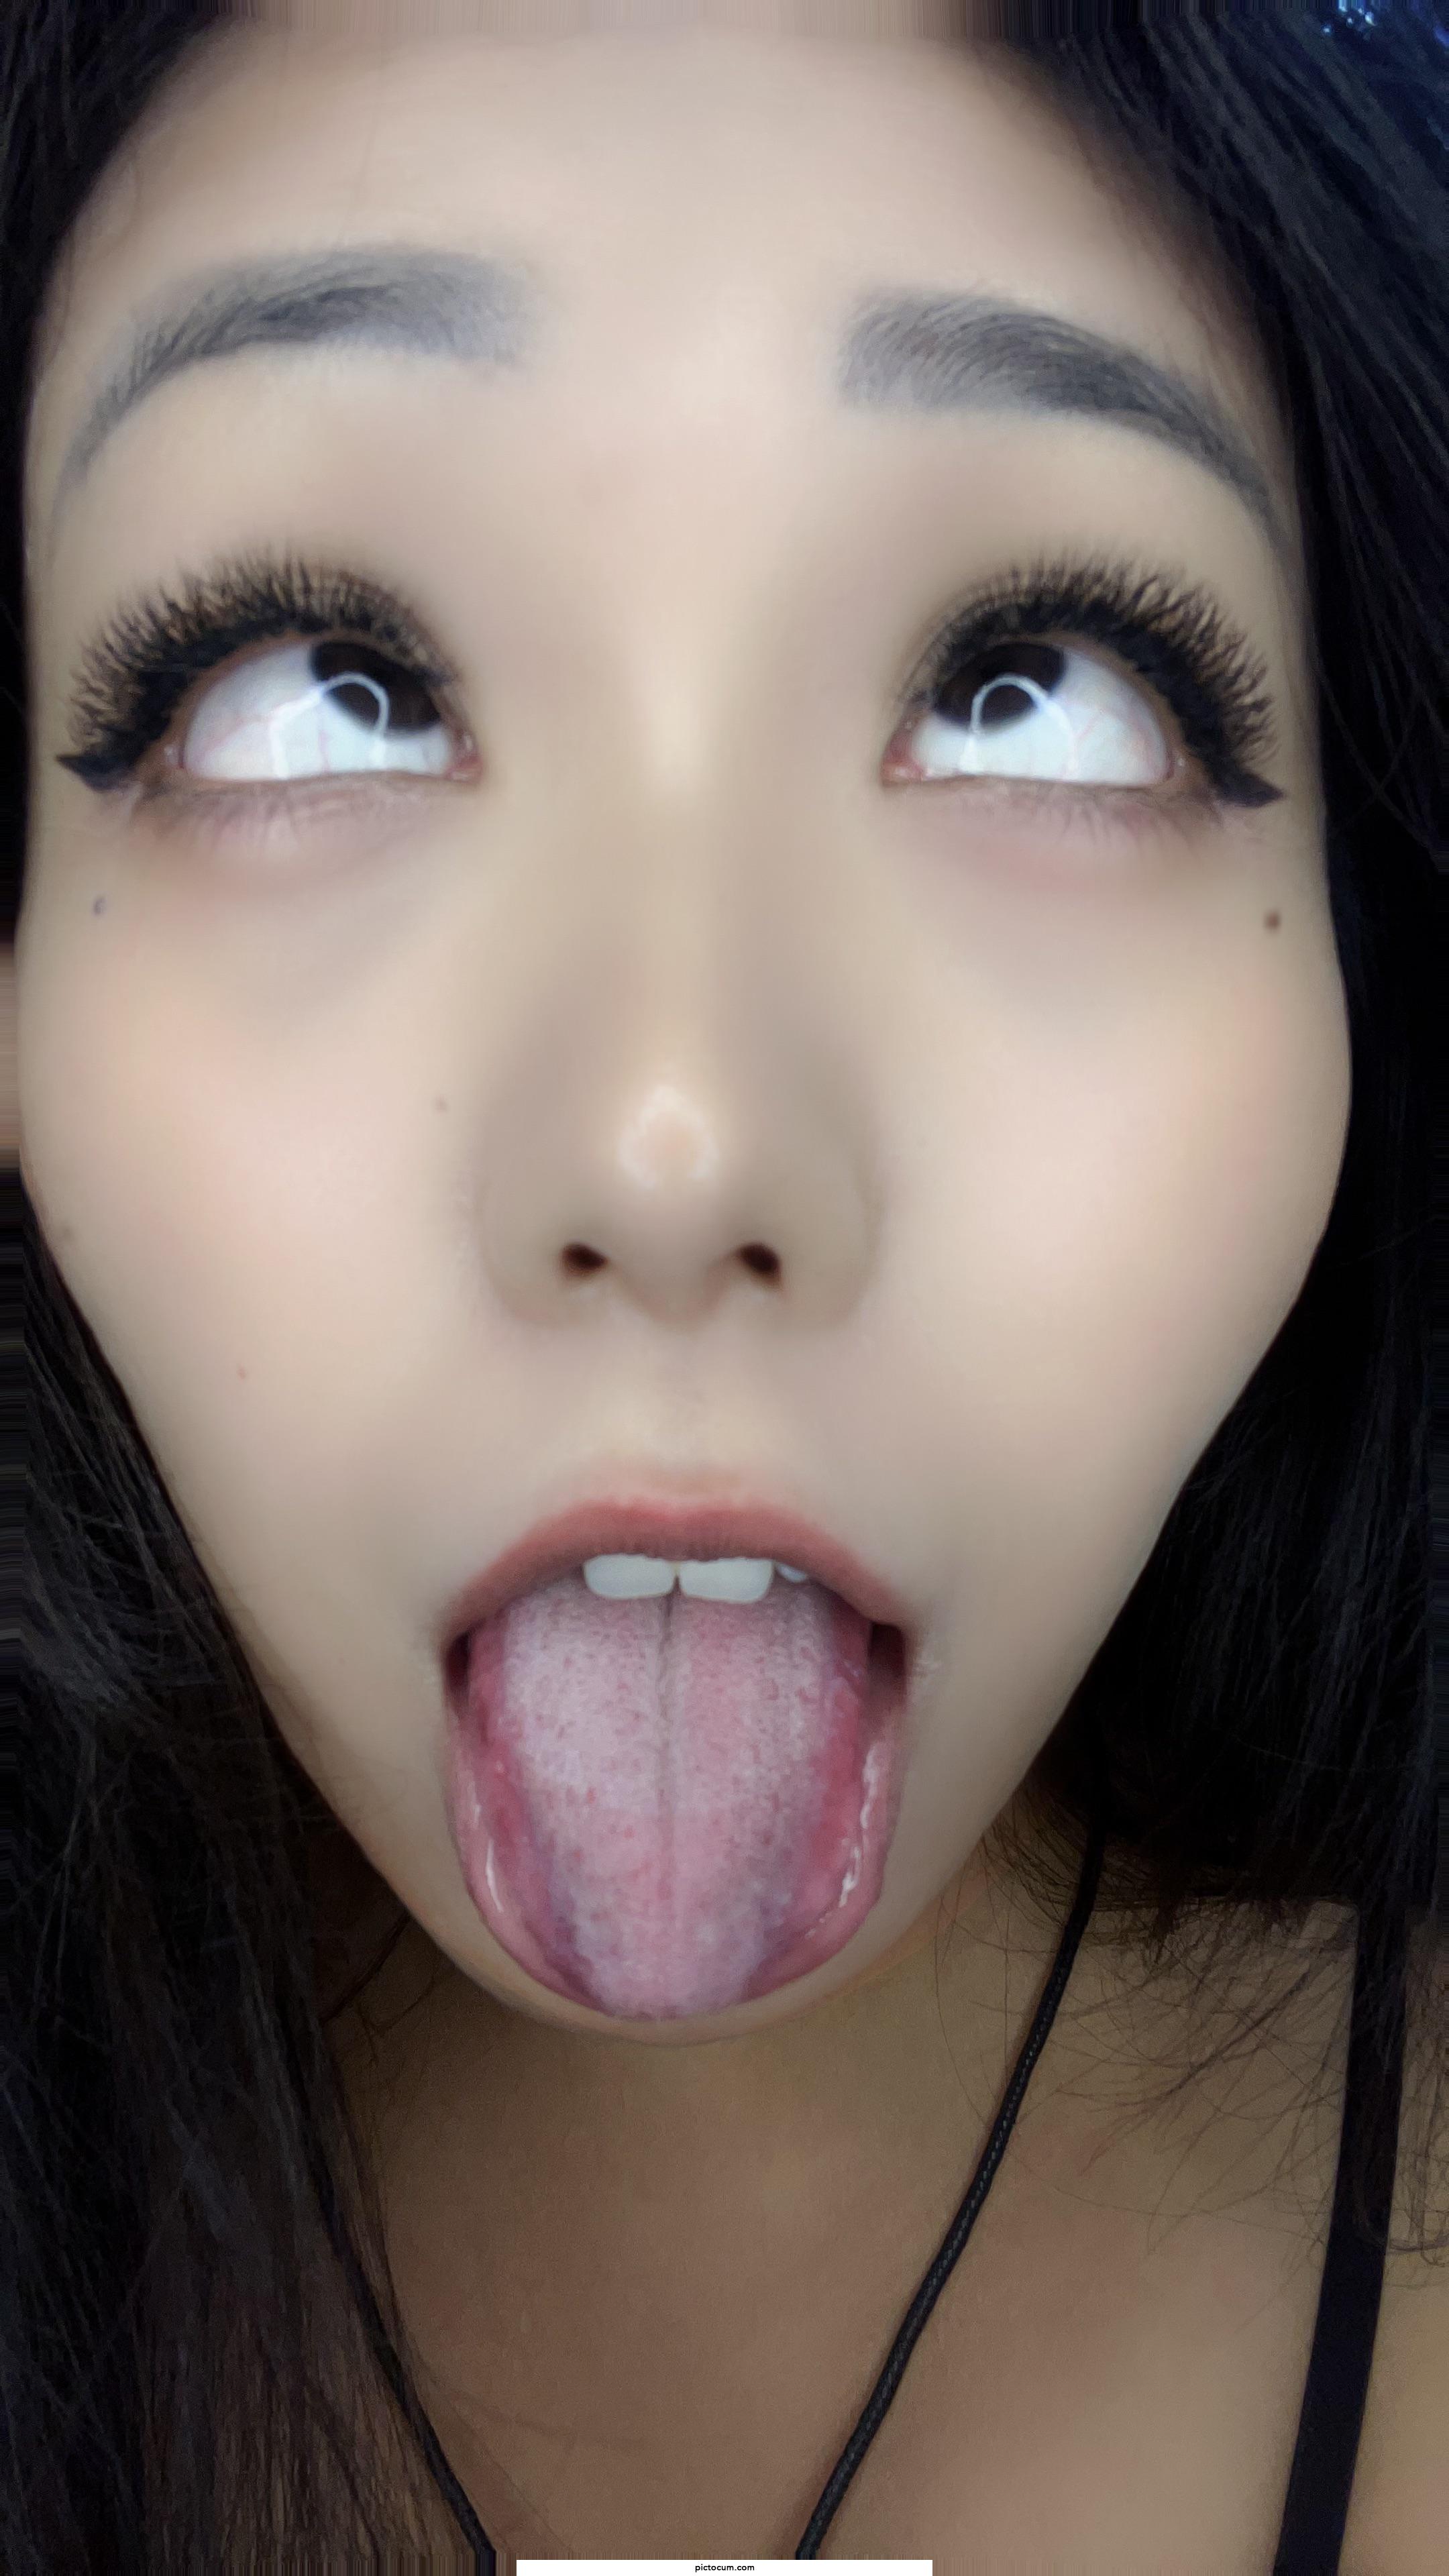 Thoughts on Ahegao faces?